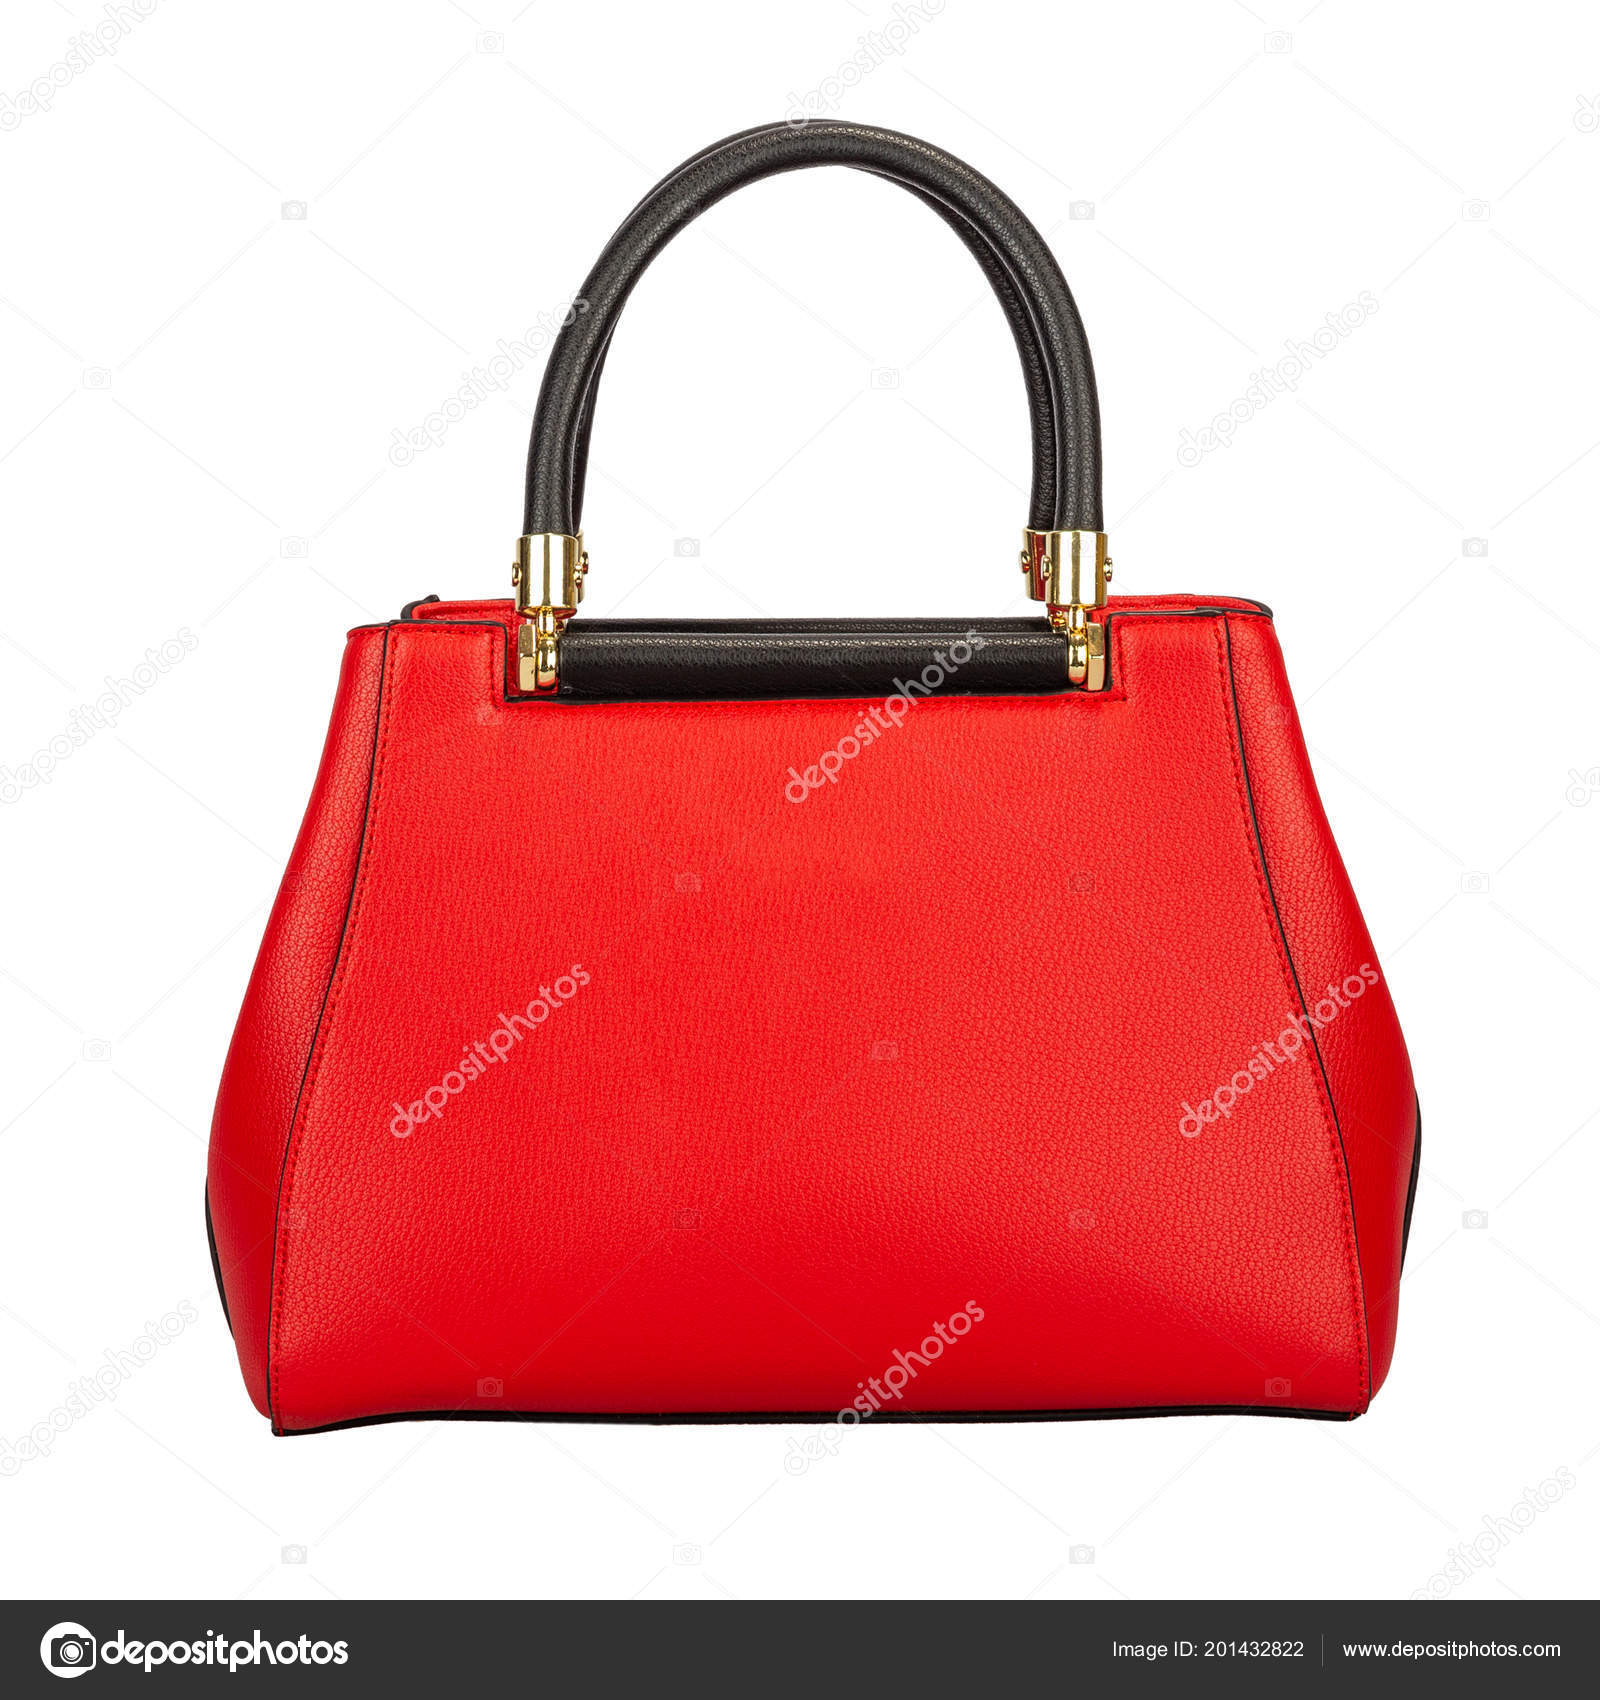 What Color Handbag Goes With Everything? Versatile Hues | LoveToKnow